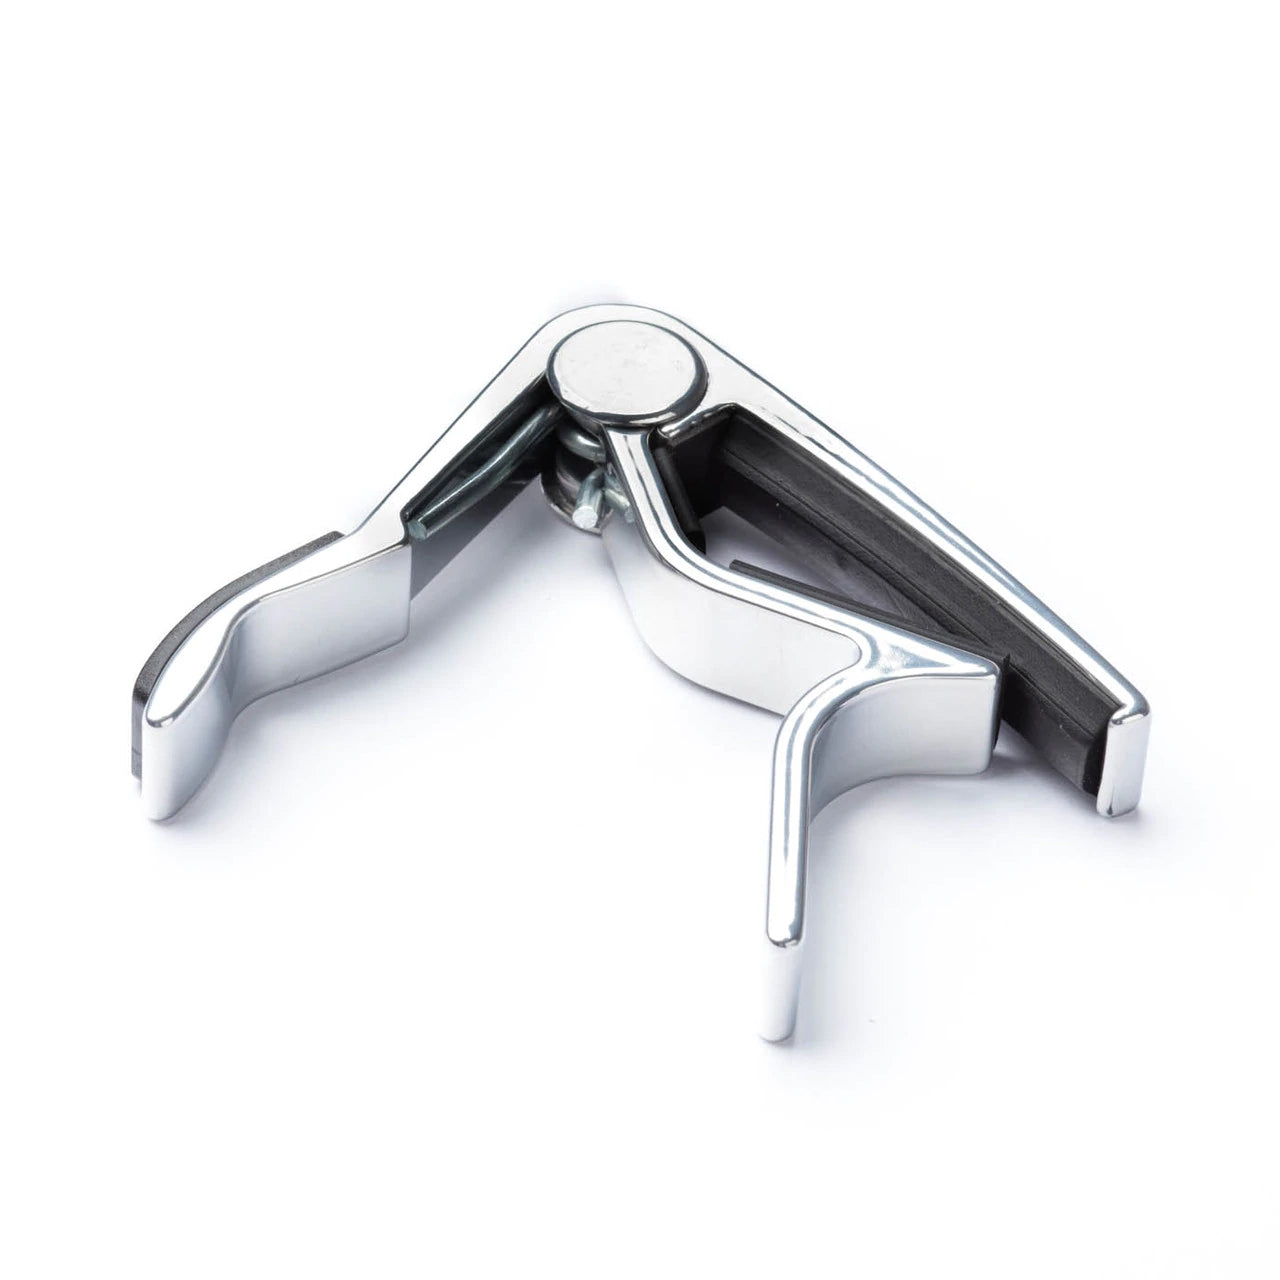 Dunlop 83CN Trigger Capo Acoustic Curved (Nickel) 變調夾